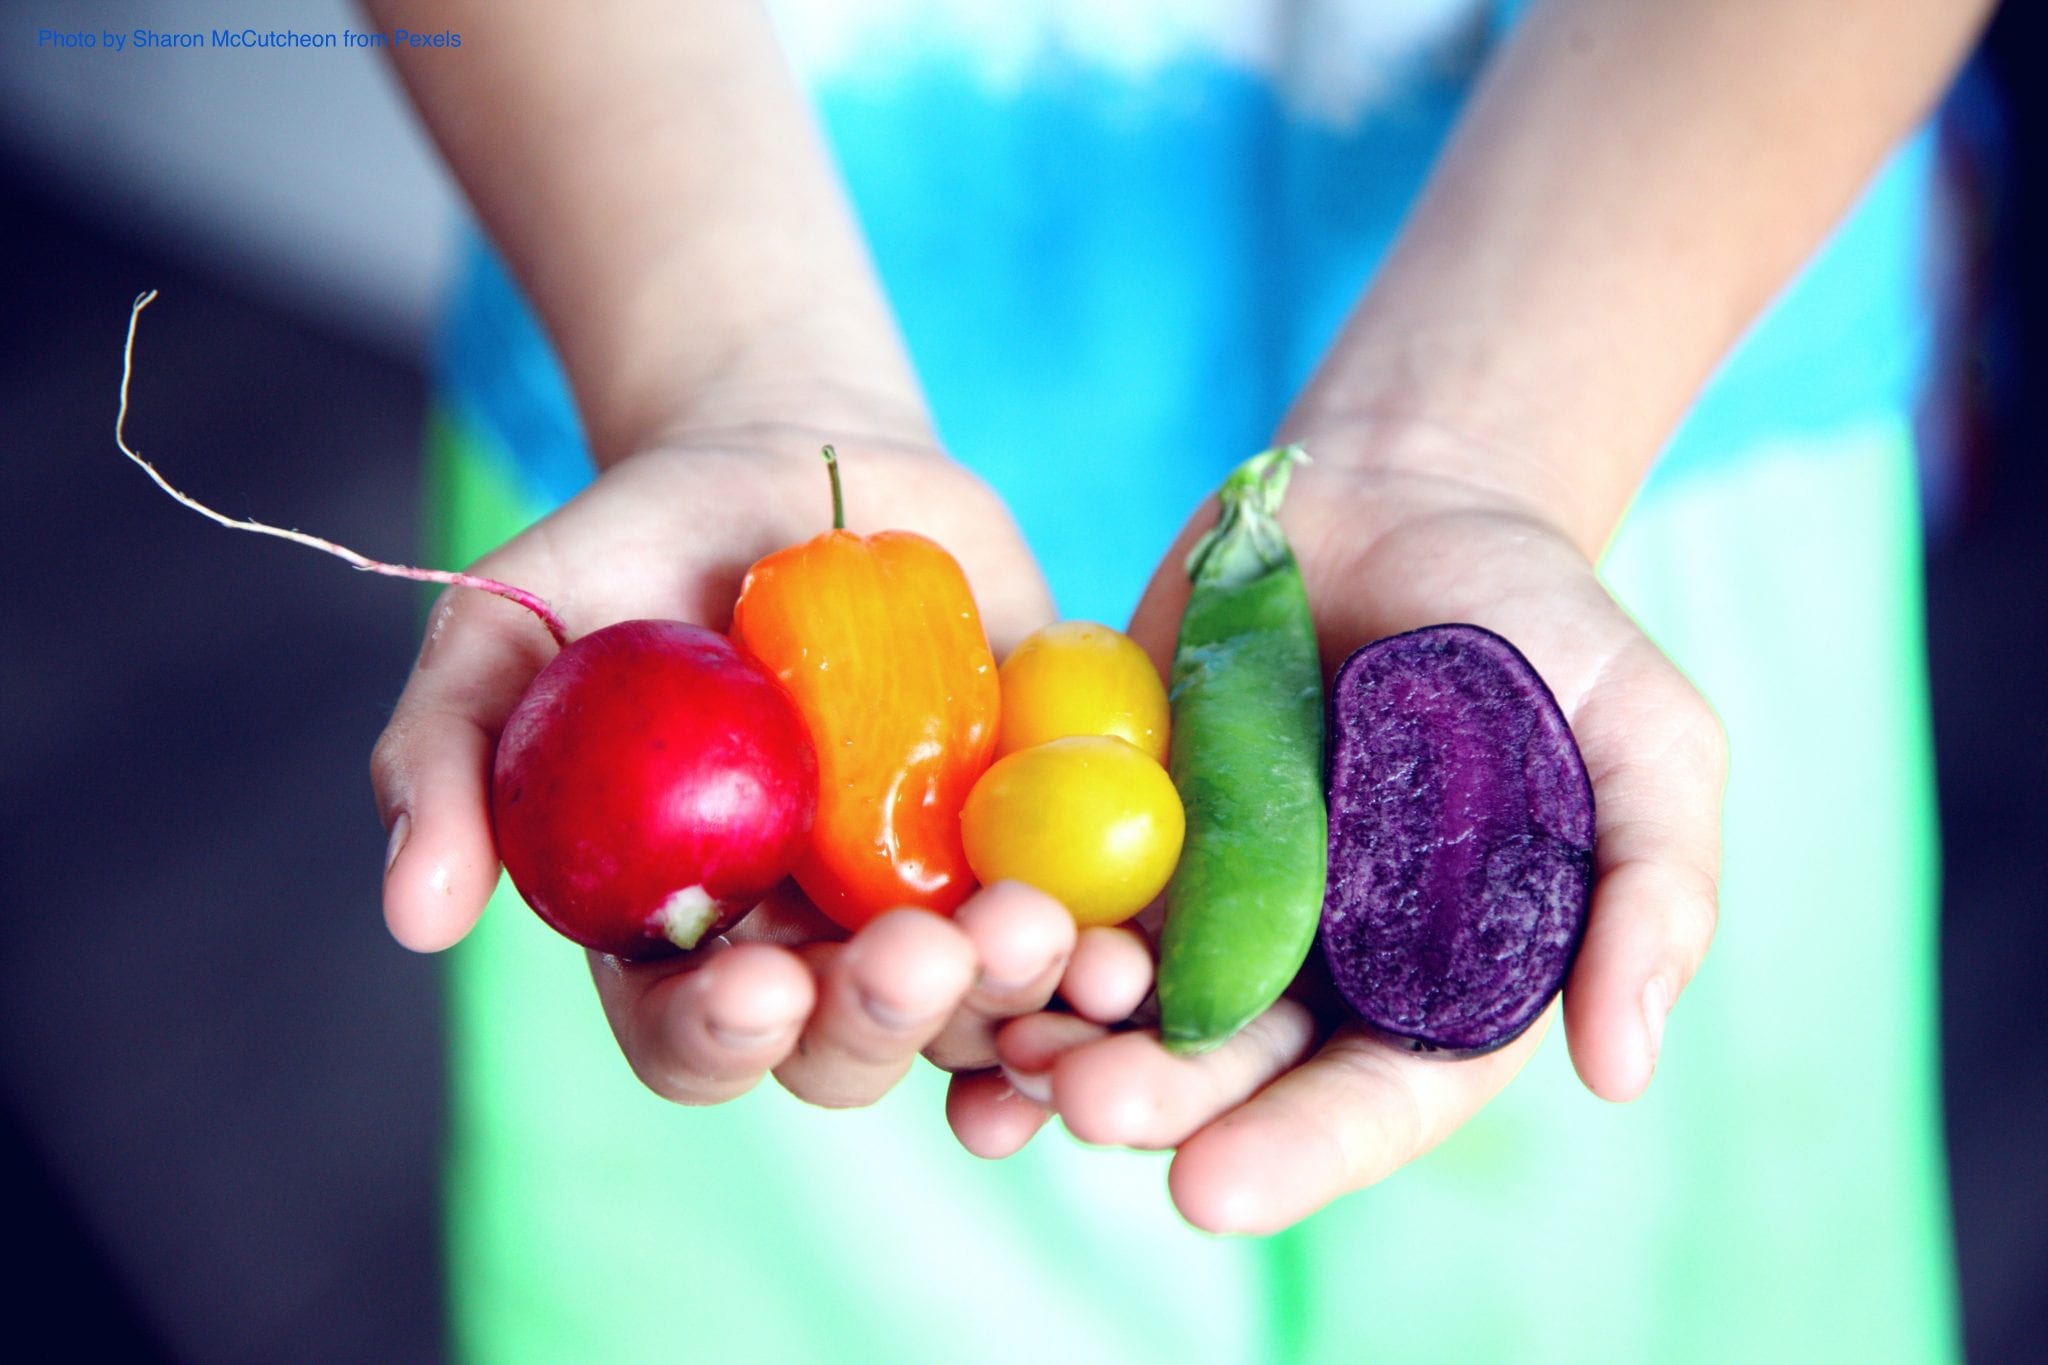 Two hands holding Colorful vegetables